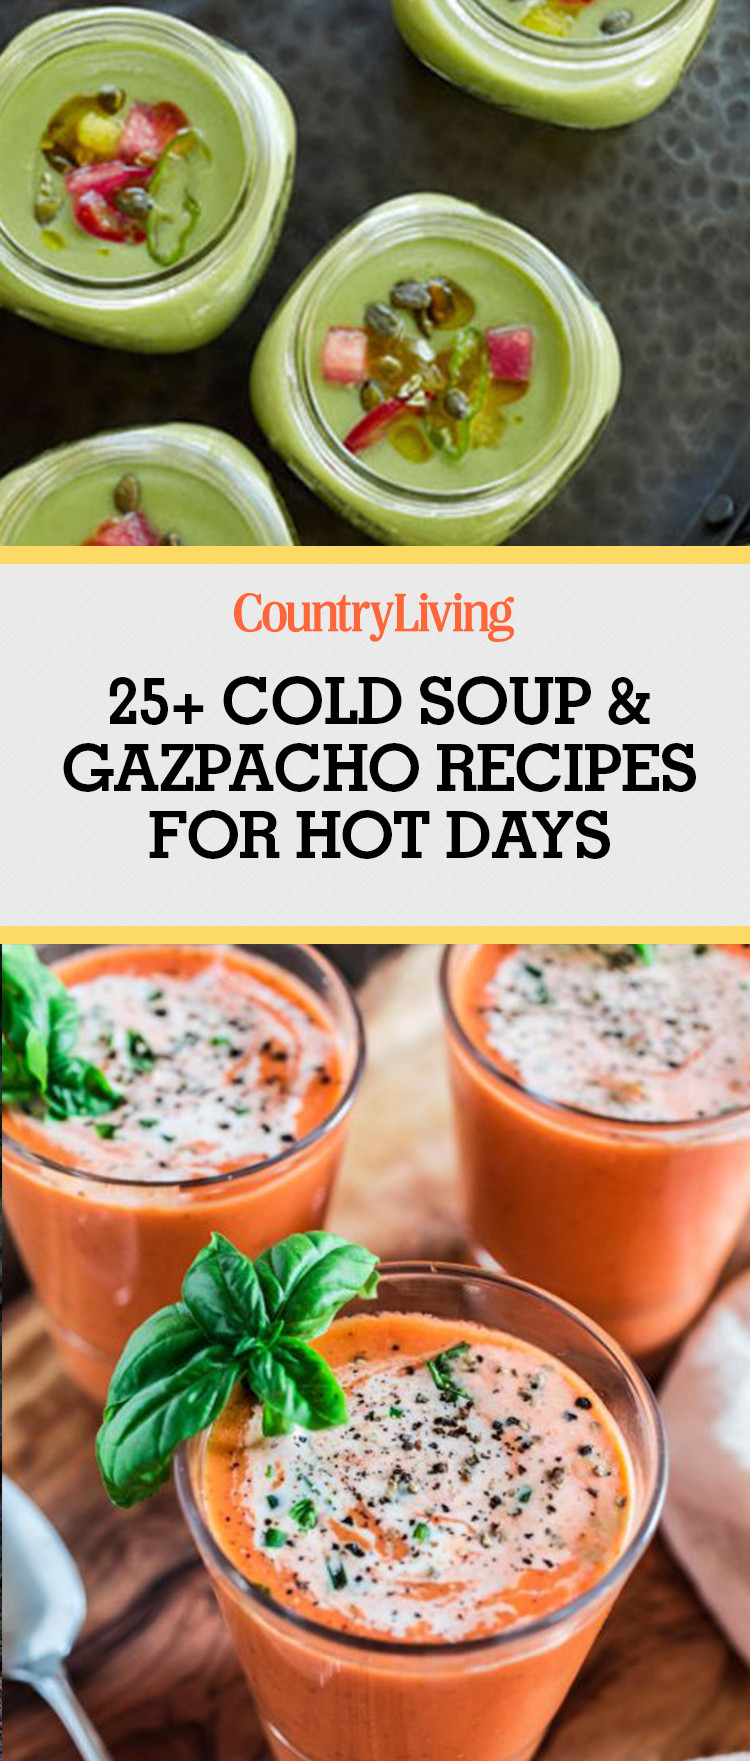 Summer Soups Ideas
 29 Cold Summer Soups and Gazpacho Recipes Recipes for